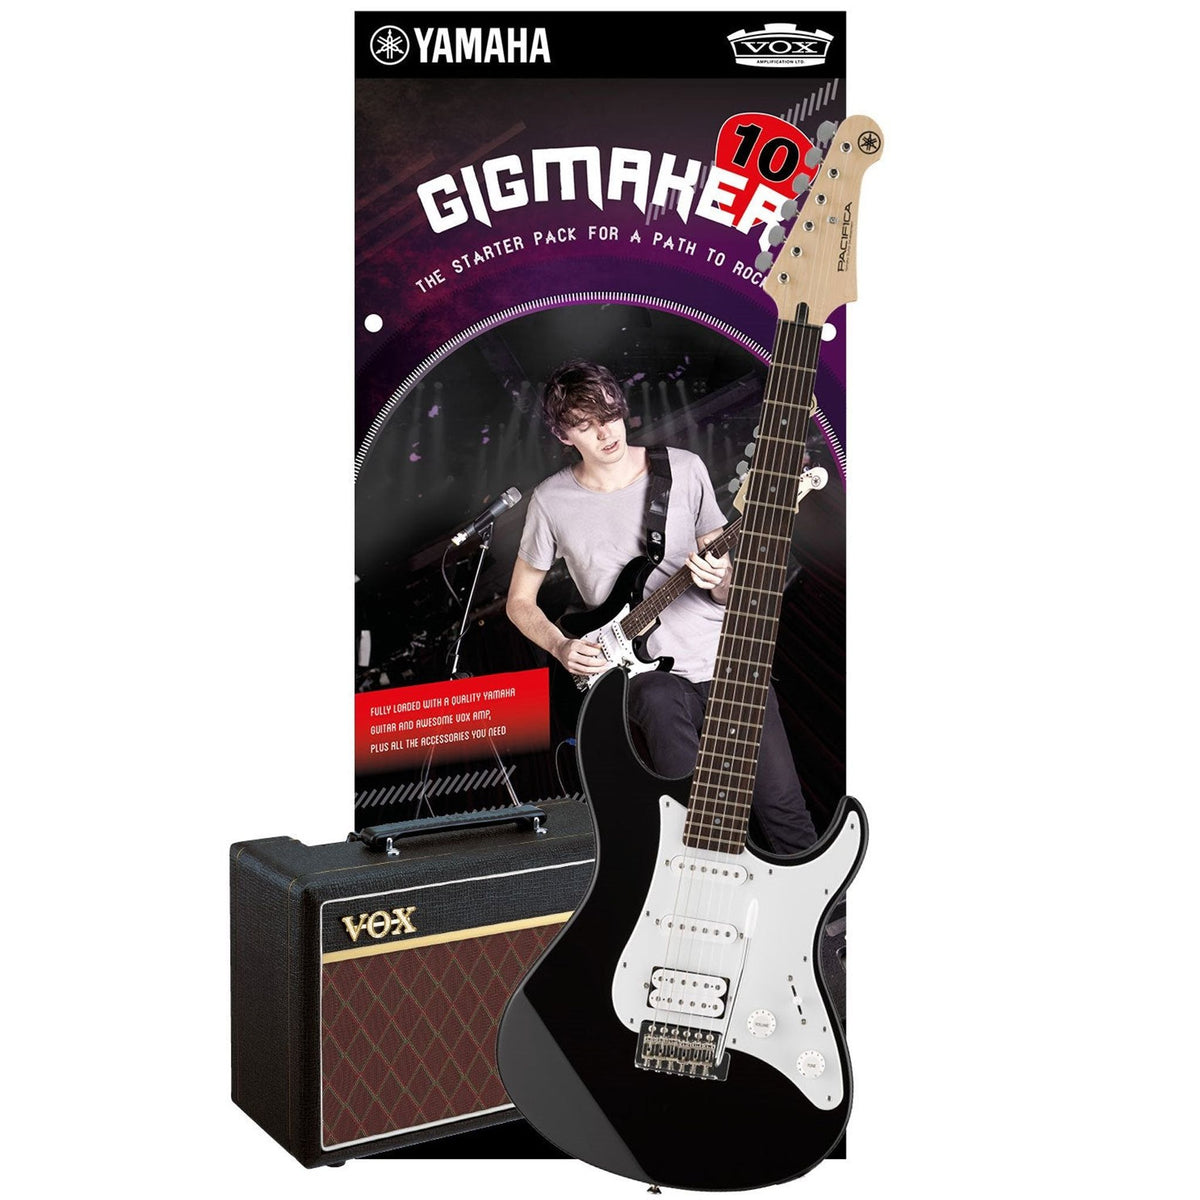 The Yamaha PAC012 Gigmaker Electric Guitar Pack is an amazing starter pack. Loaded with all the accessories you need to start playing your instrument.